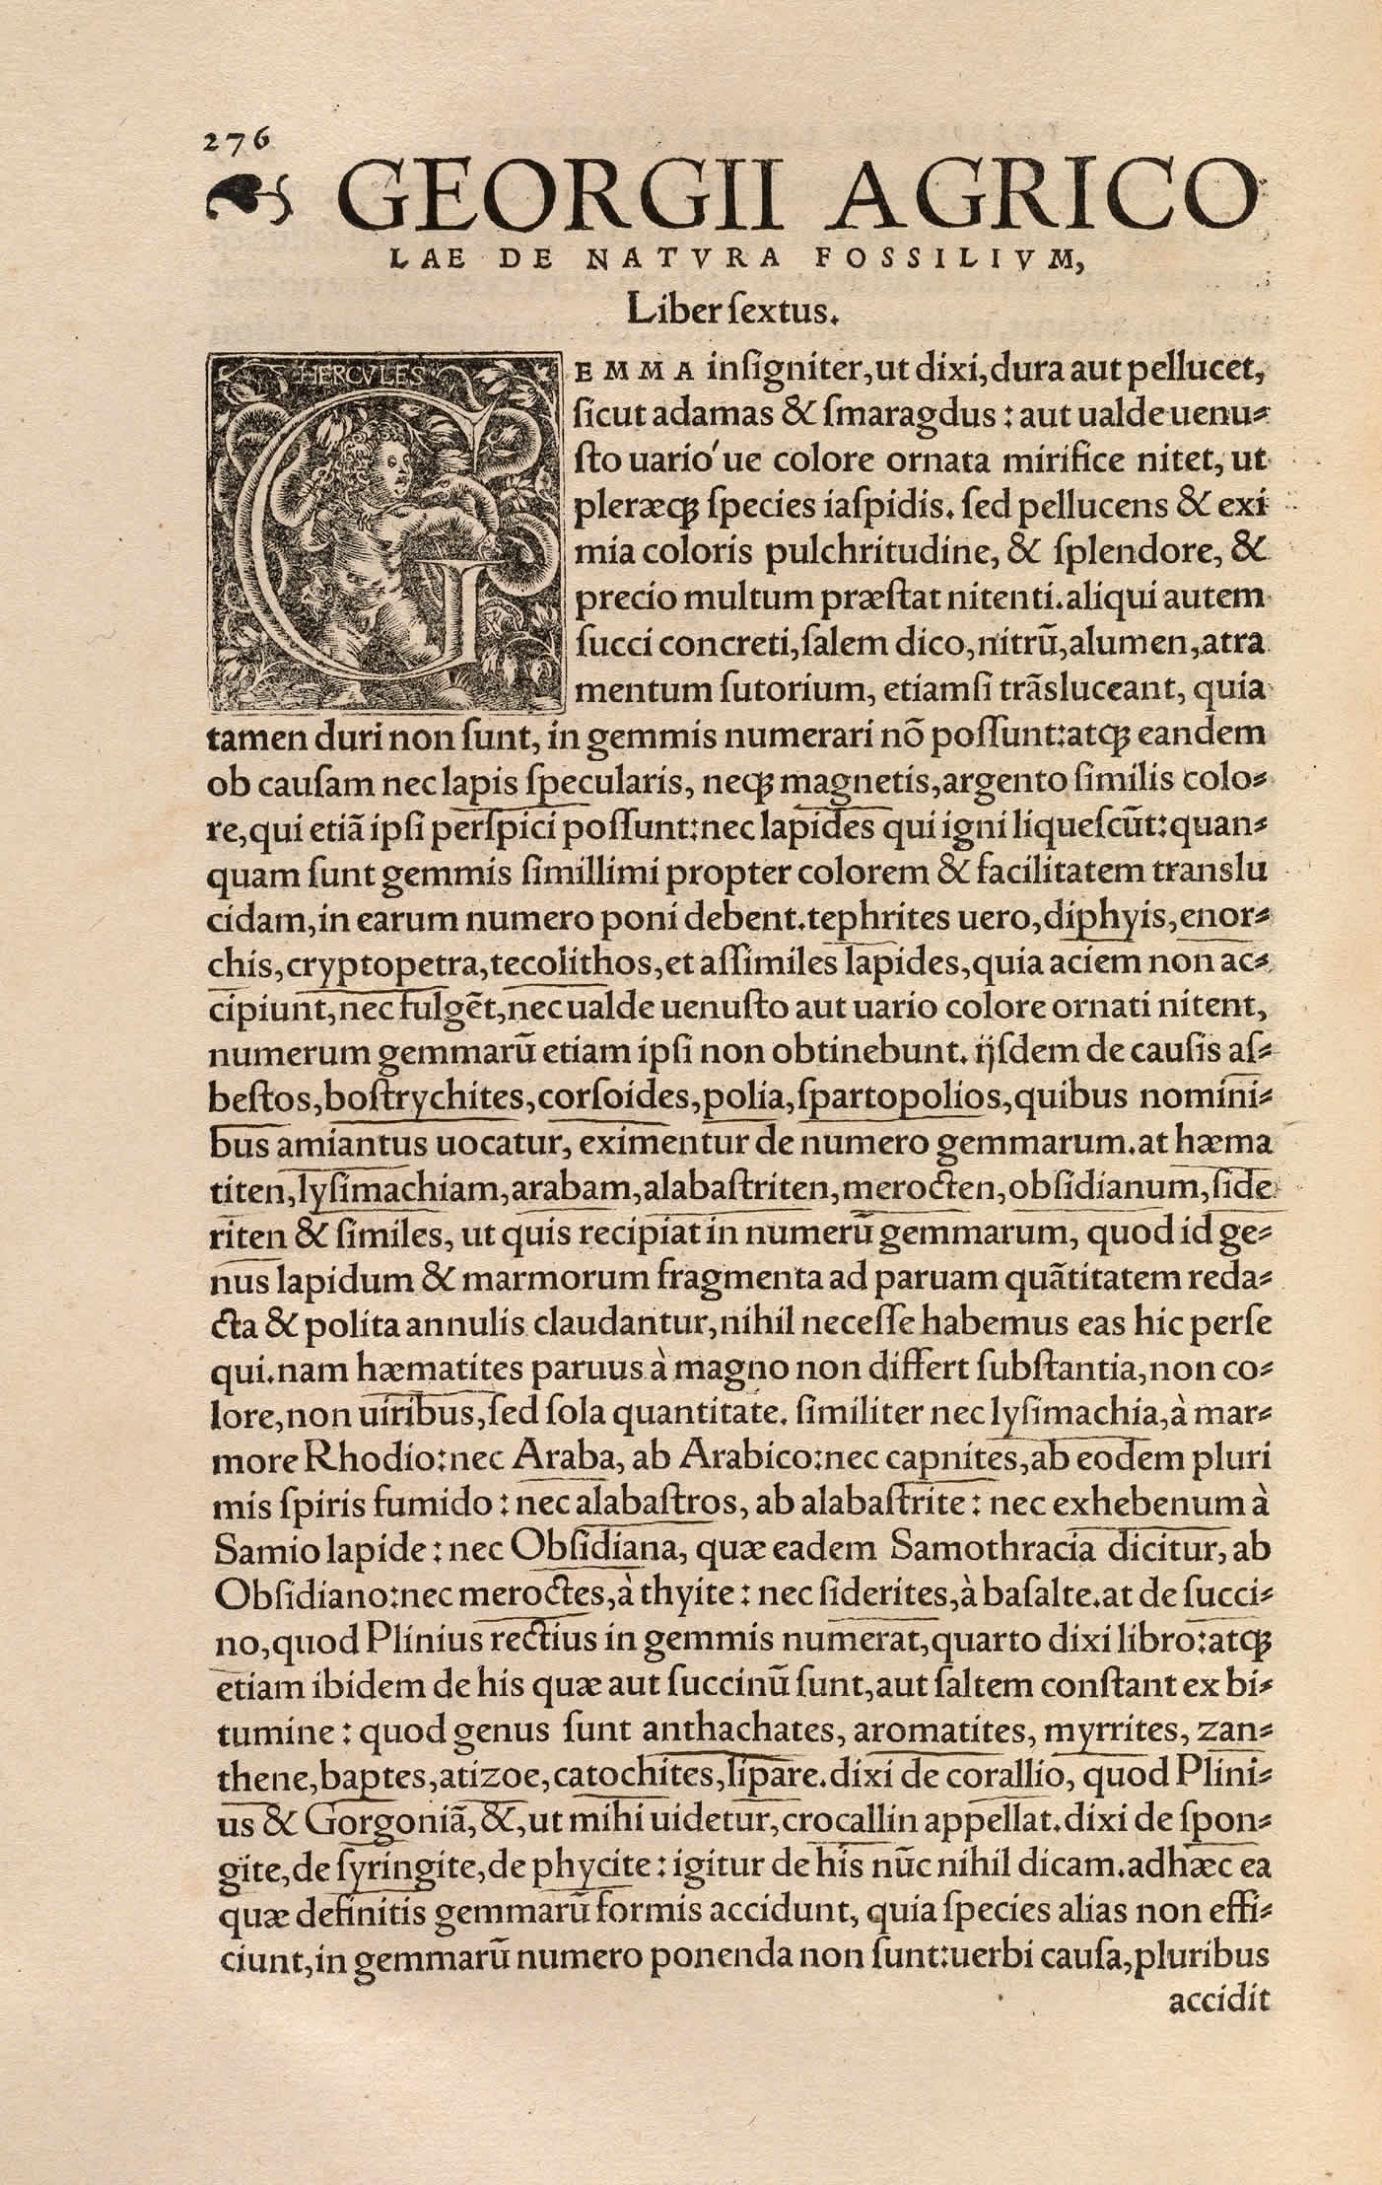 Image 2 from GEORG AGRICOLA (1494 - 1555). De Ortu et Causis Subterraneorum [and other works]. Basel: Hieronymus Frobenius and Nikolaus Episcopius, 1546.